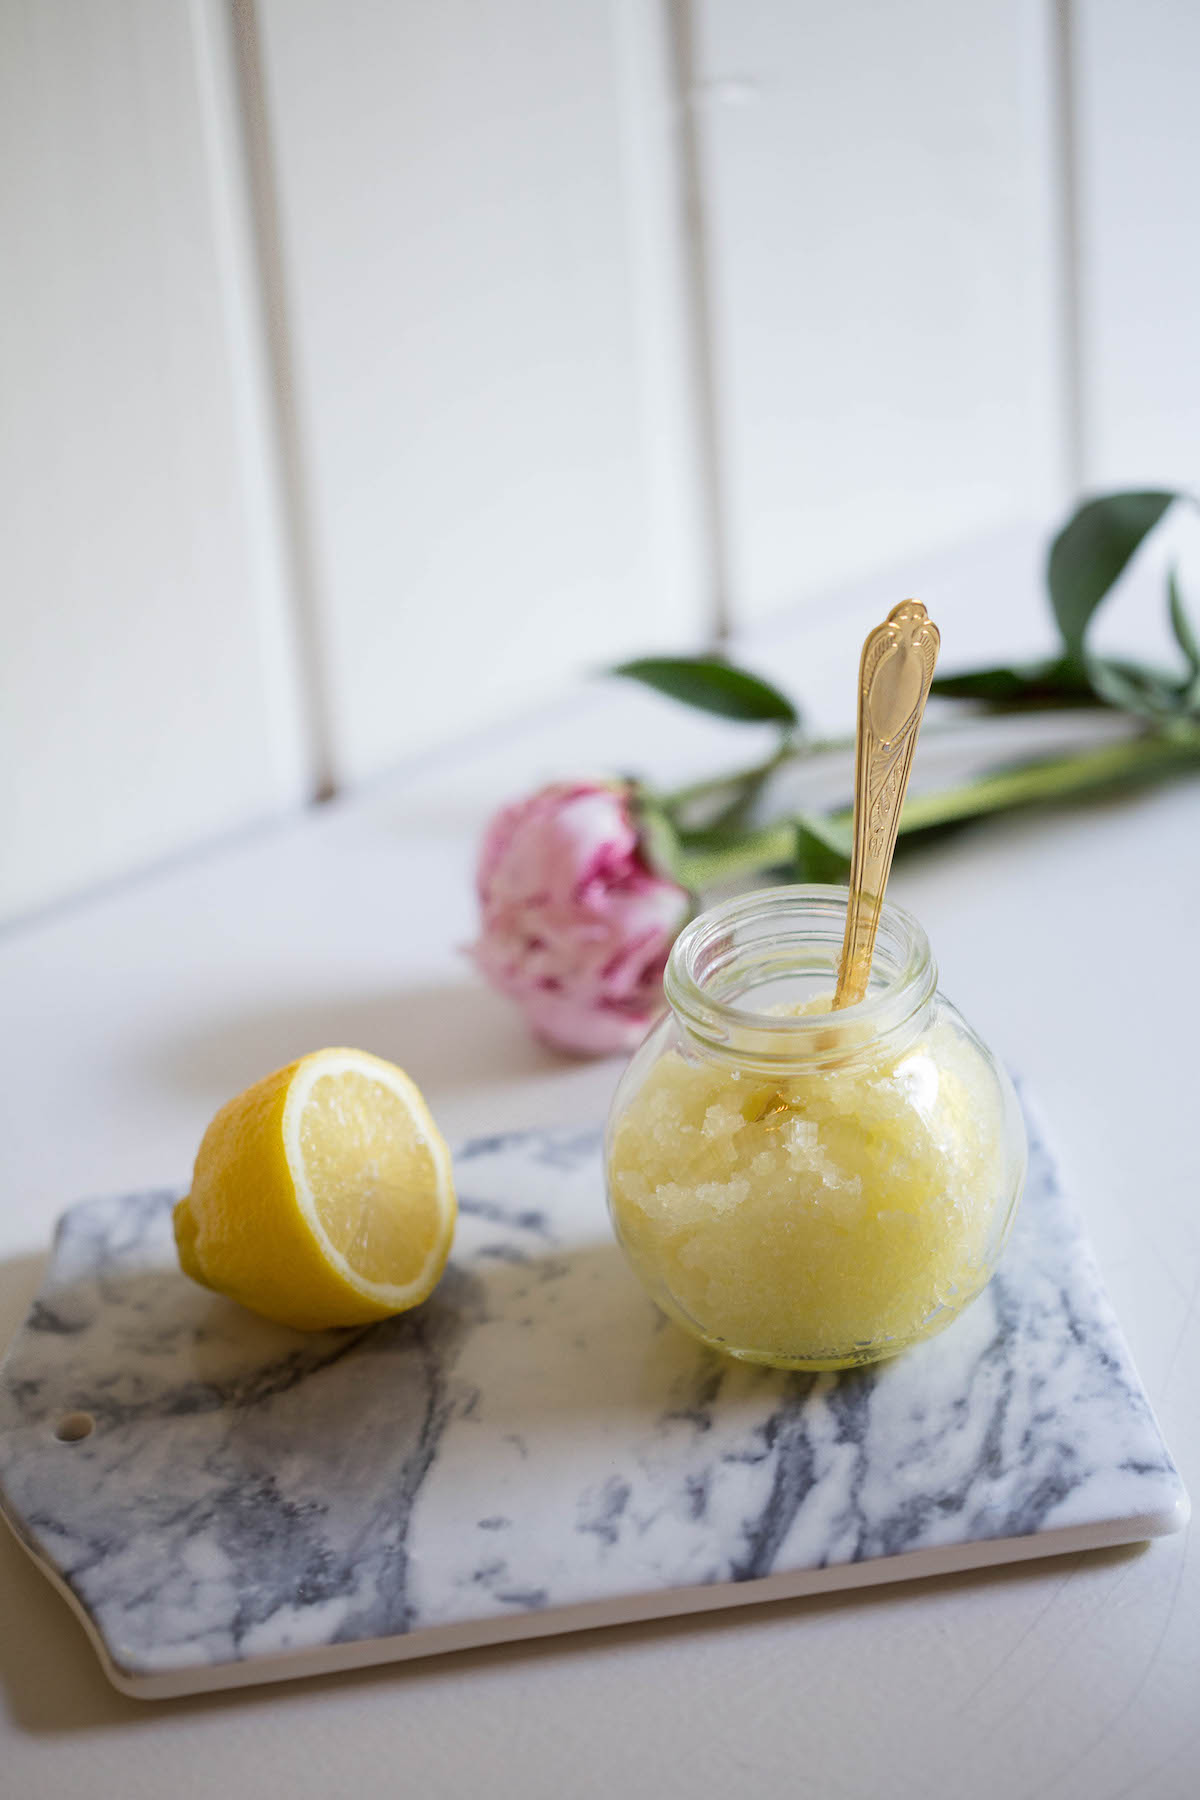 homemade body scrub with ingredients you already have at home